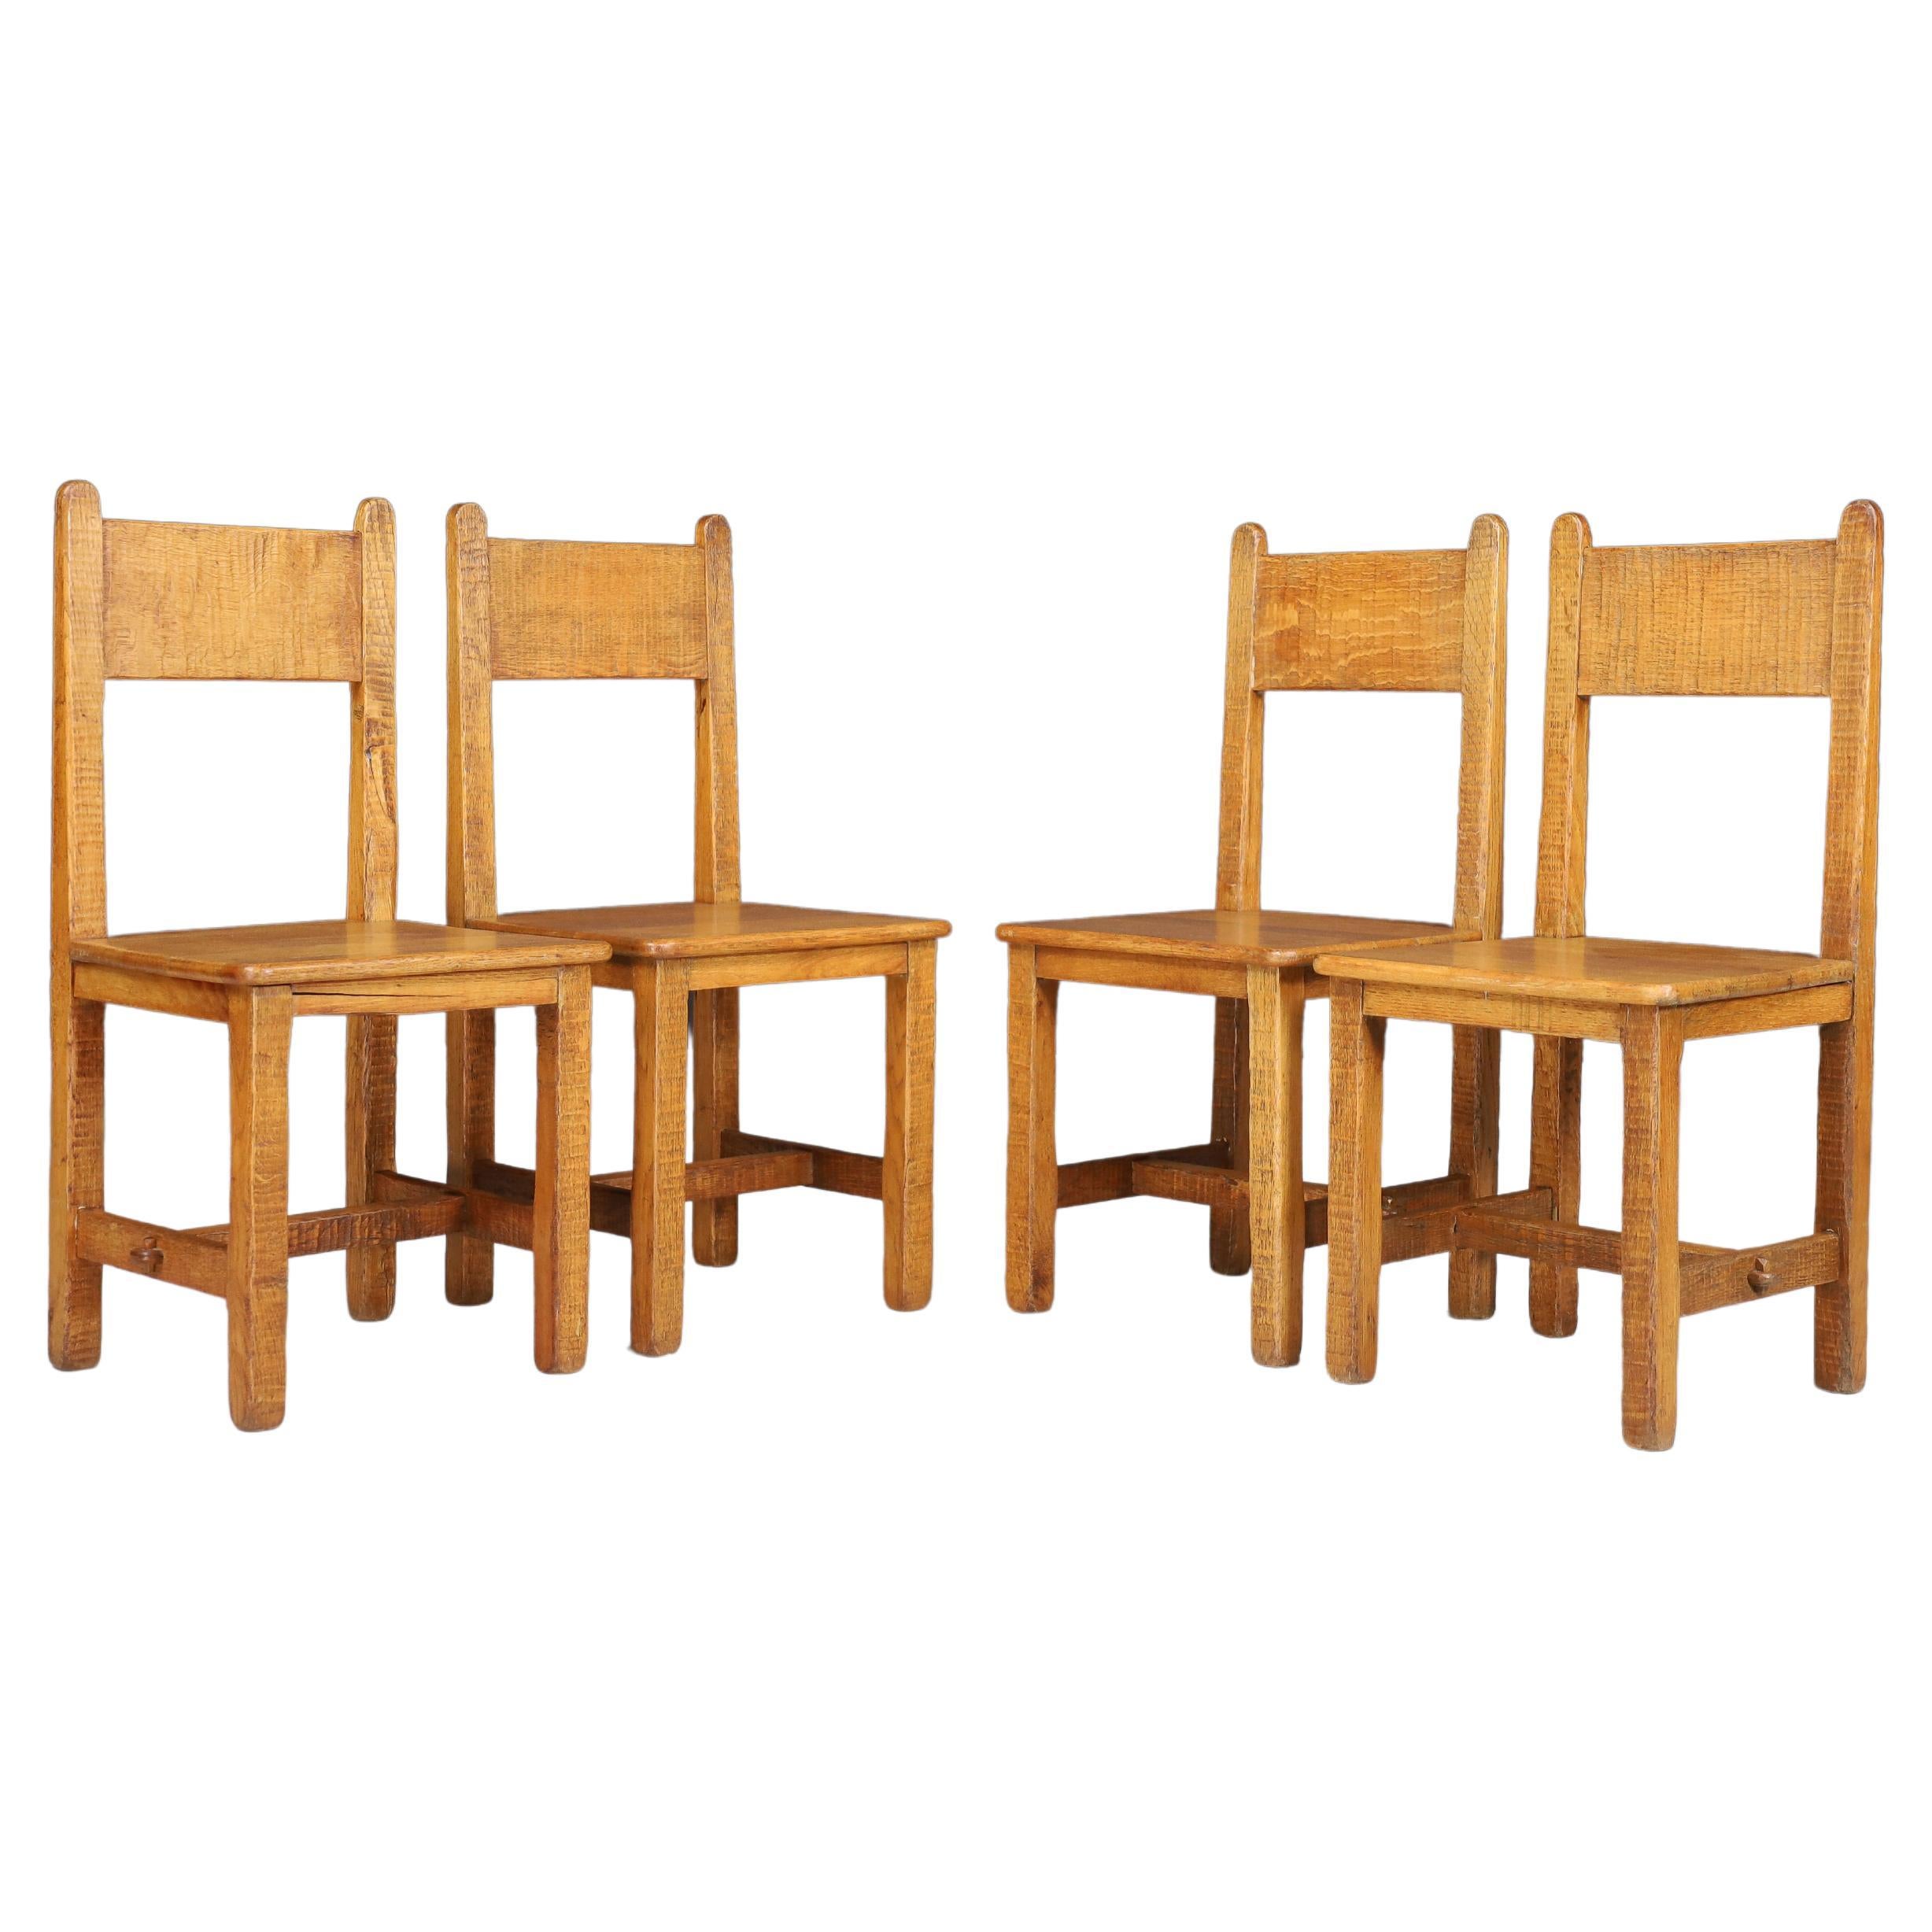 Set of Four Primitive Chairs in Patinated Oak, France, 1950s For Sale